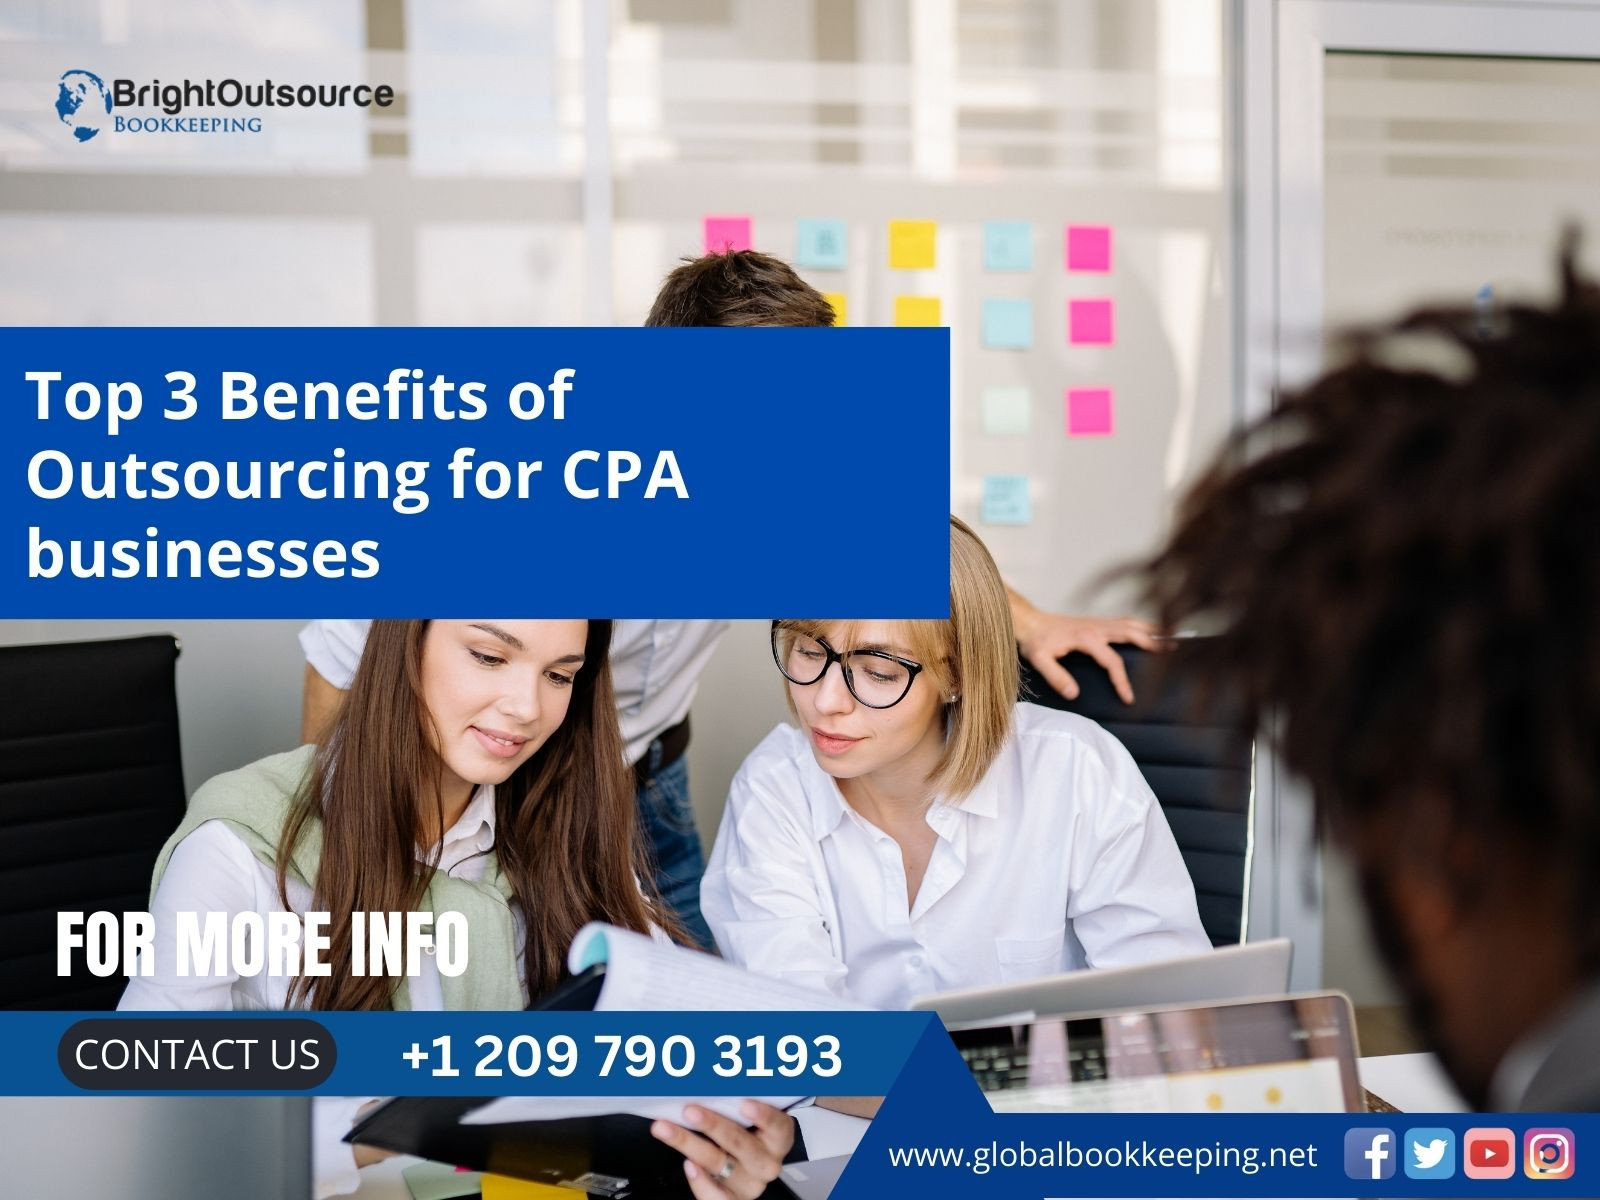 Top 3 Benefits of Outsourcing for CPA businesses